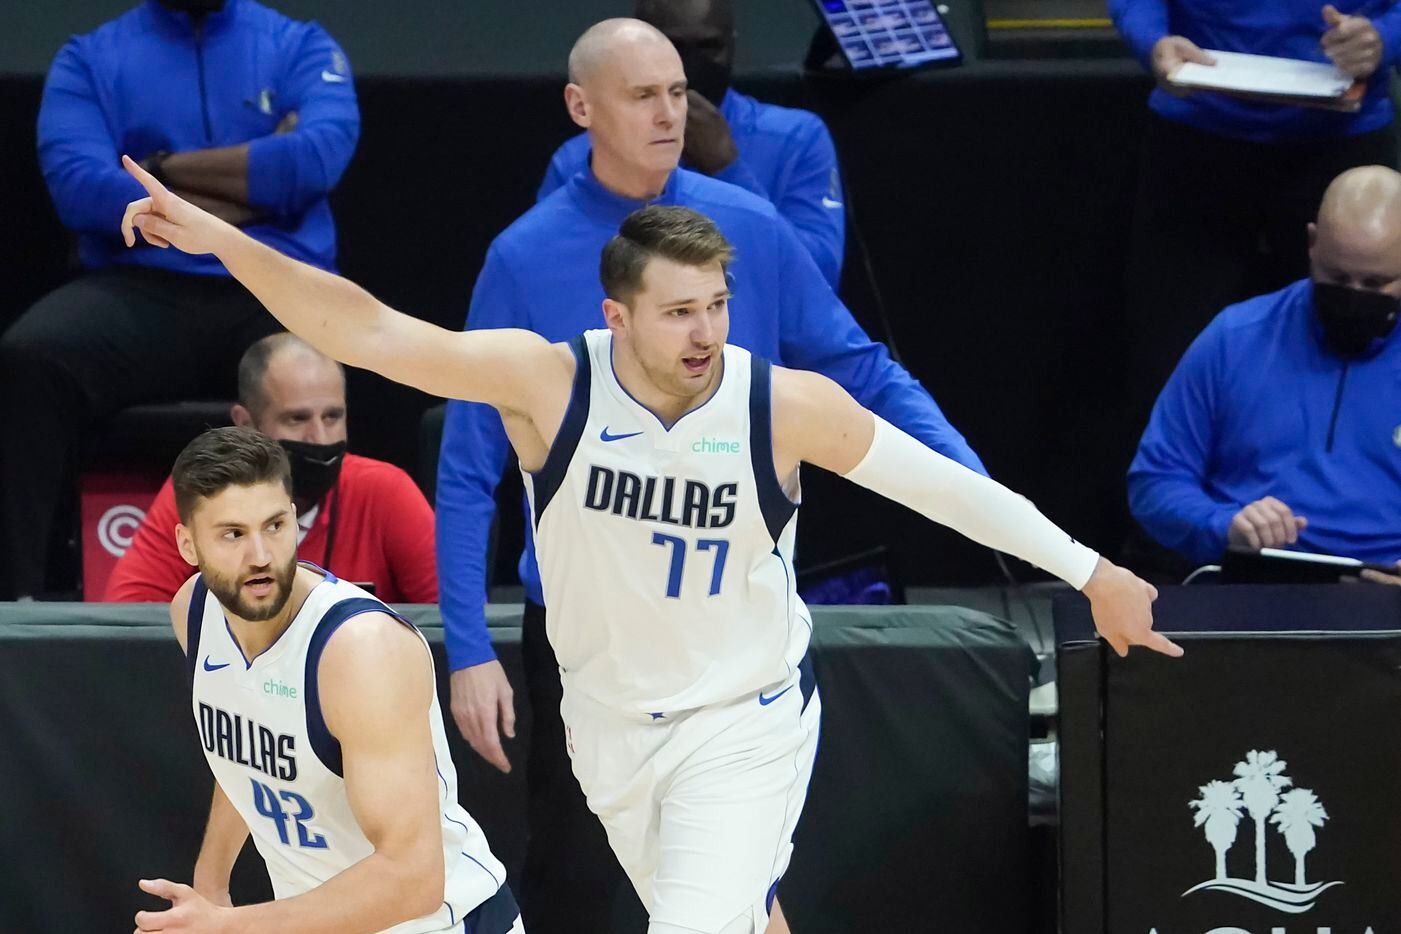 Dallas Mavericks guard Luka Doncic (77) points down court while getting back on defense with forward Maxi Kleber (42) in front of head coach Rick Carlisle during the first half of an NBA playoff basketball game against the LA Clippers at Staples Center on Tuesday, May 25, 2021, in Los Angeles.